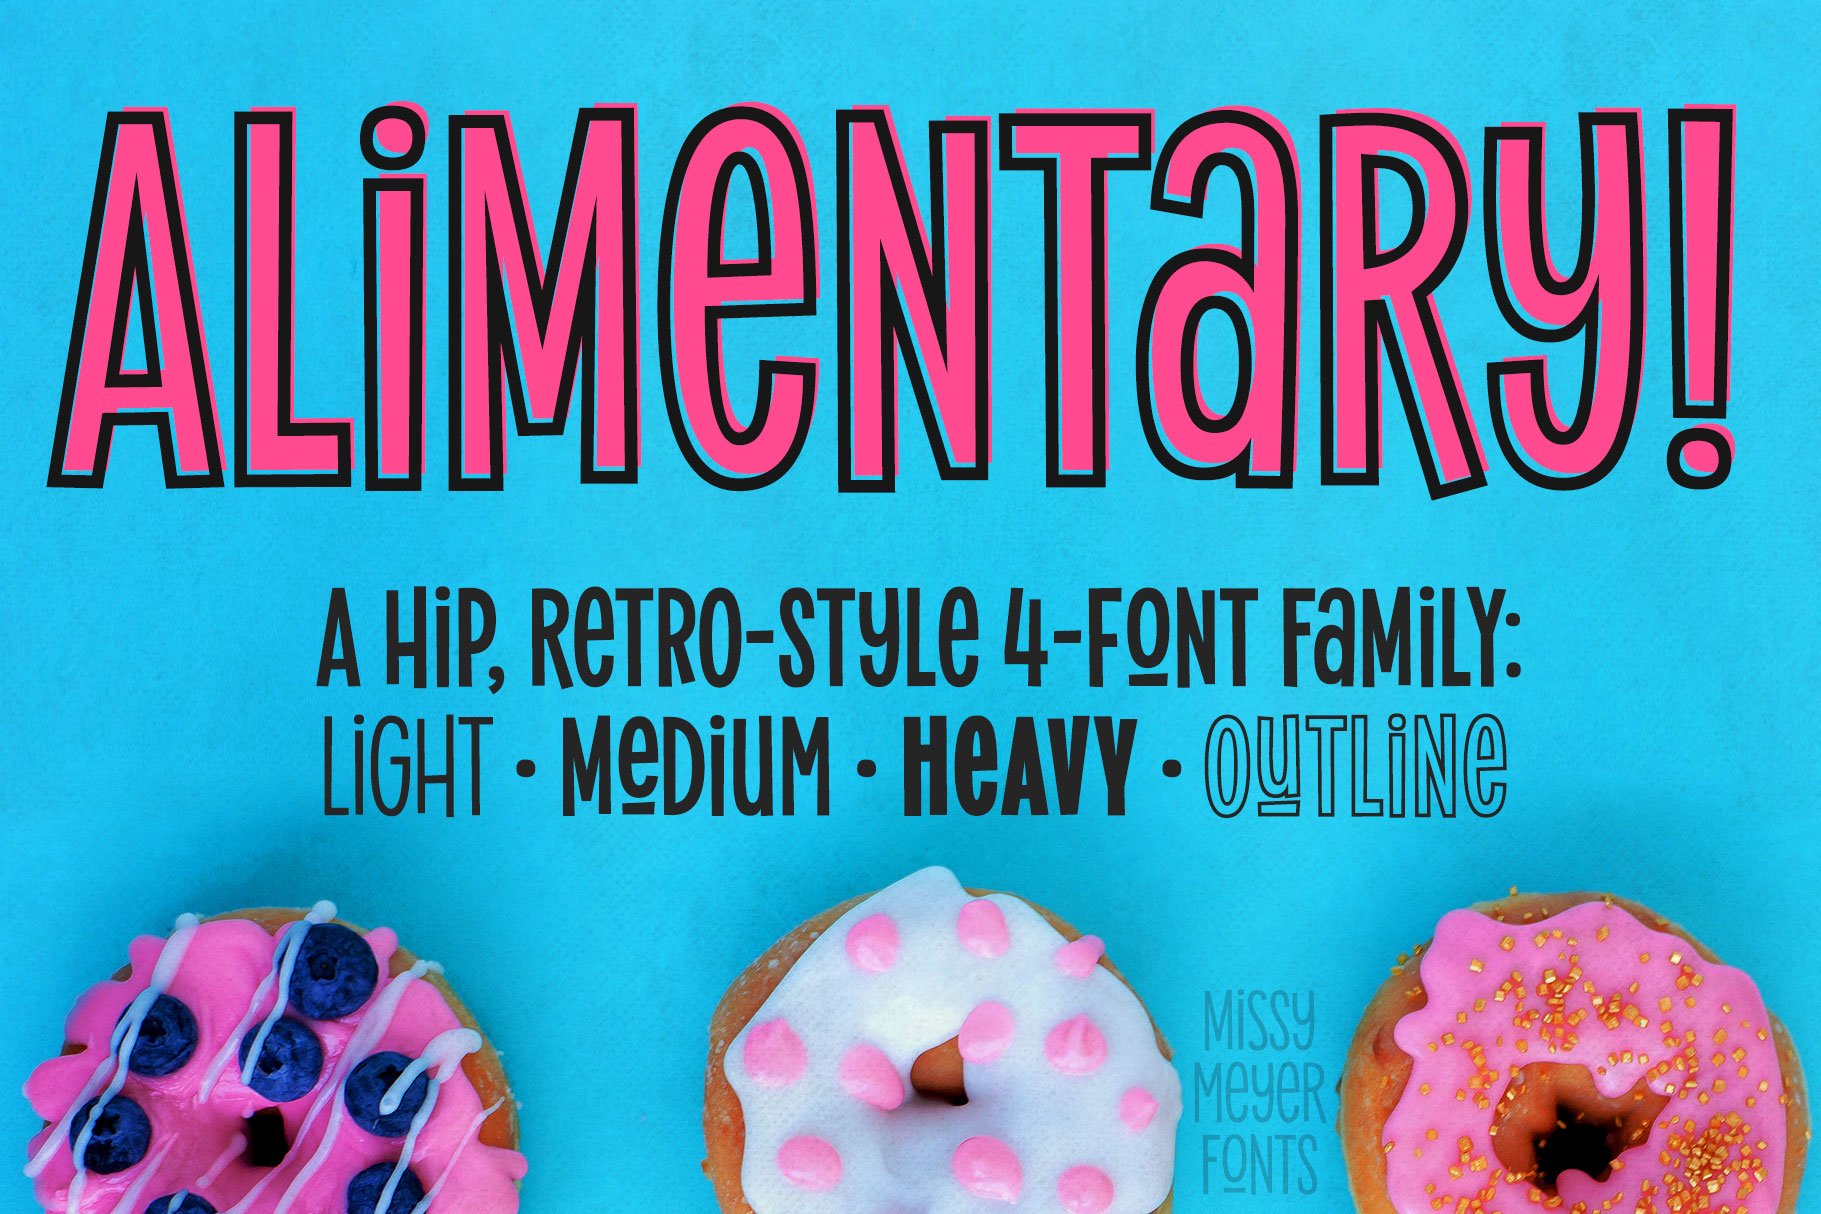 Alimentary: a hip retro font family! cover image.